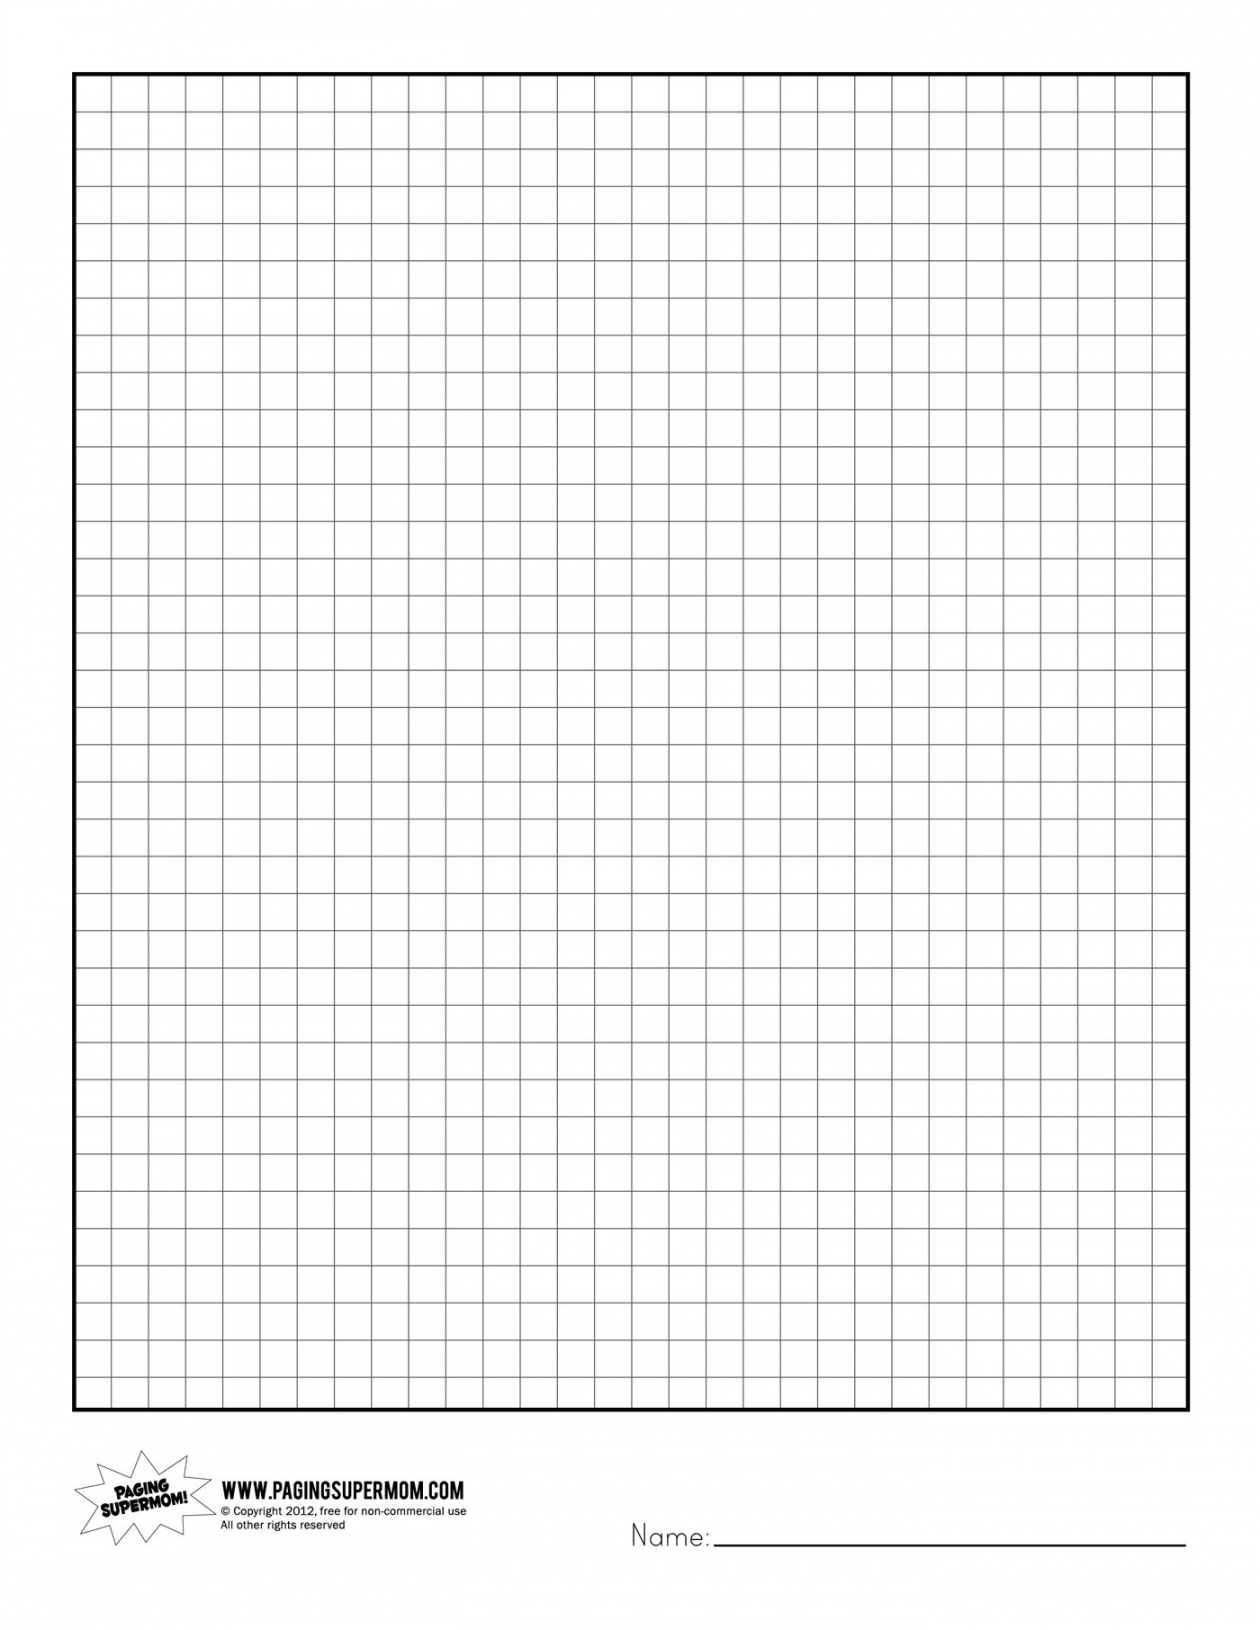 Pin on Healthy eating - FREE Printables - Grid Paper Free